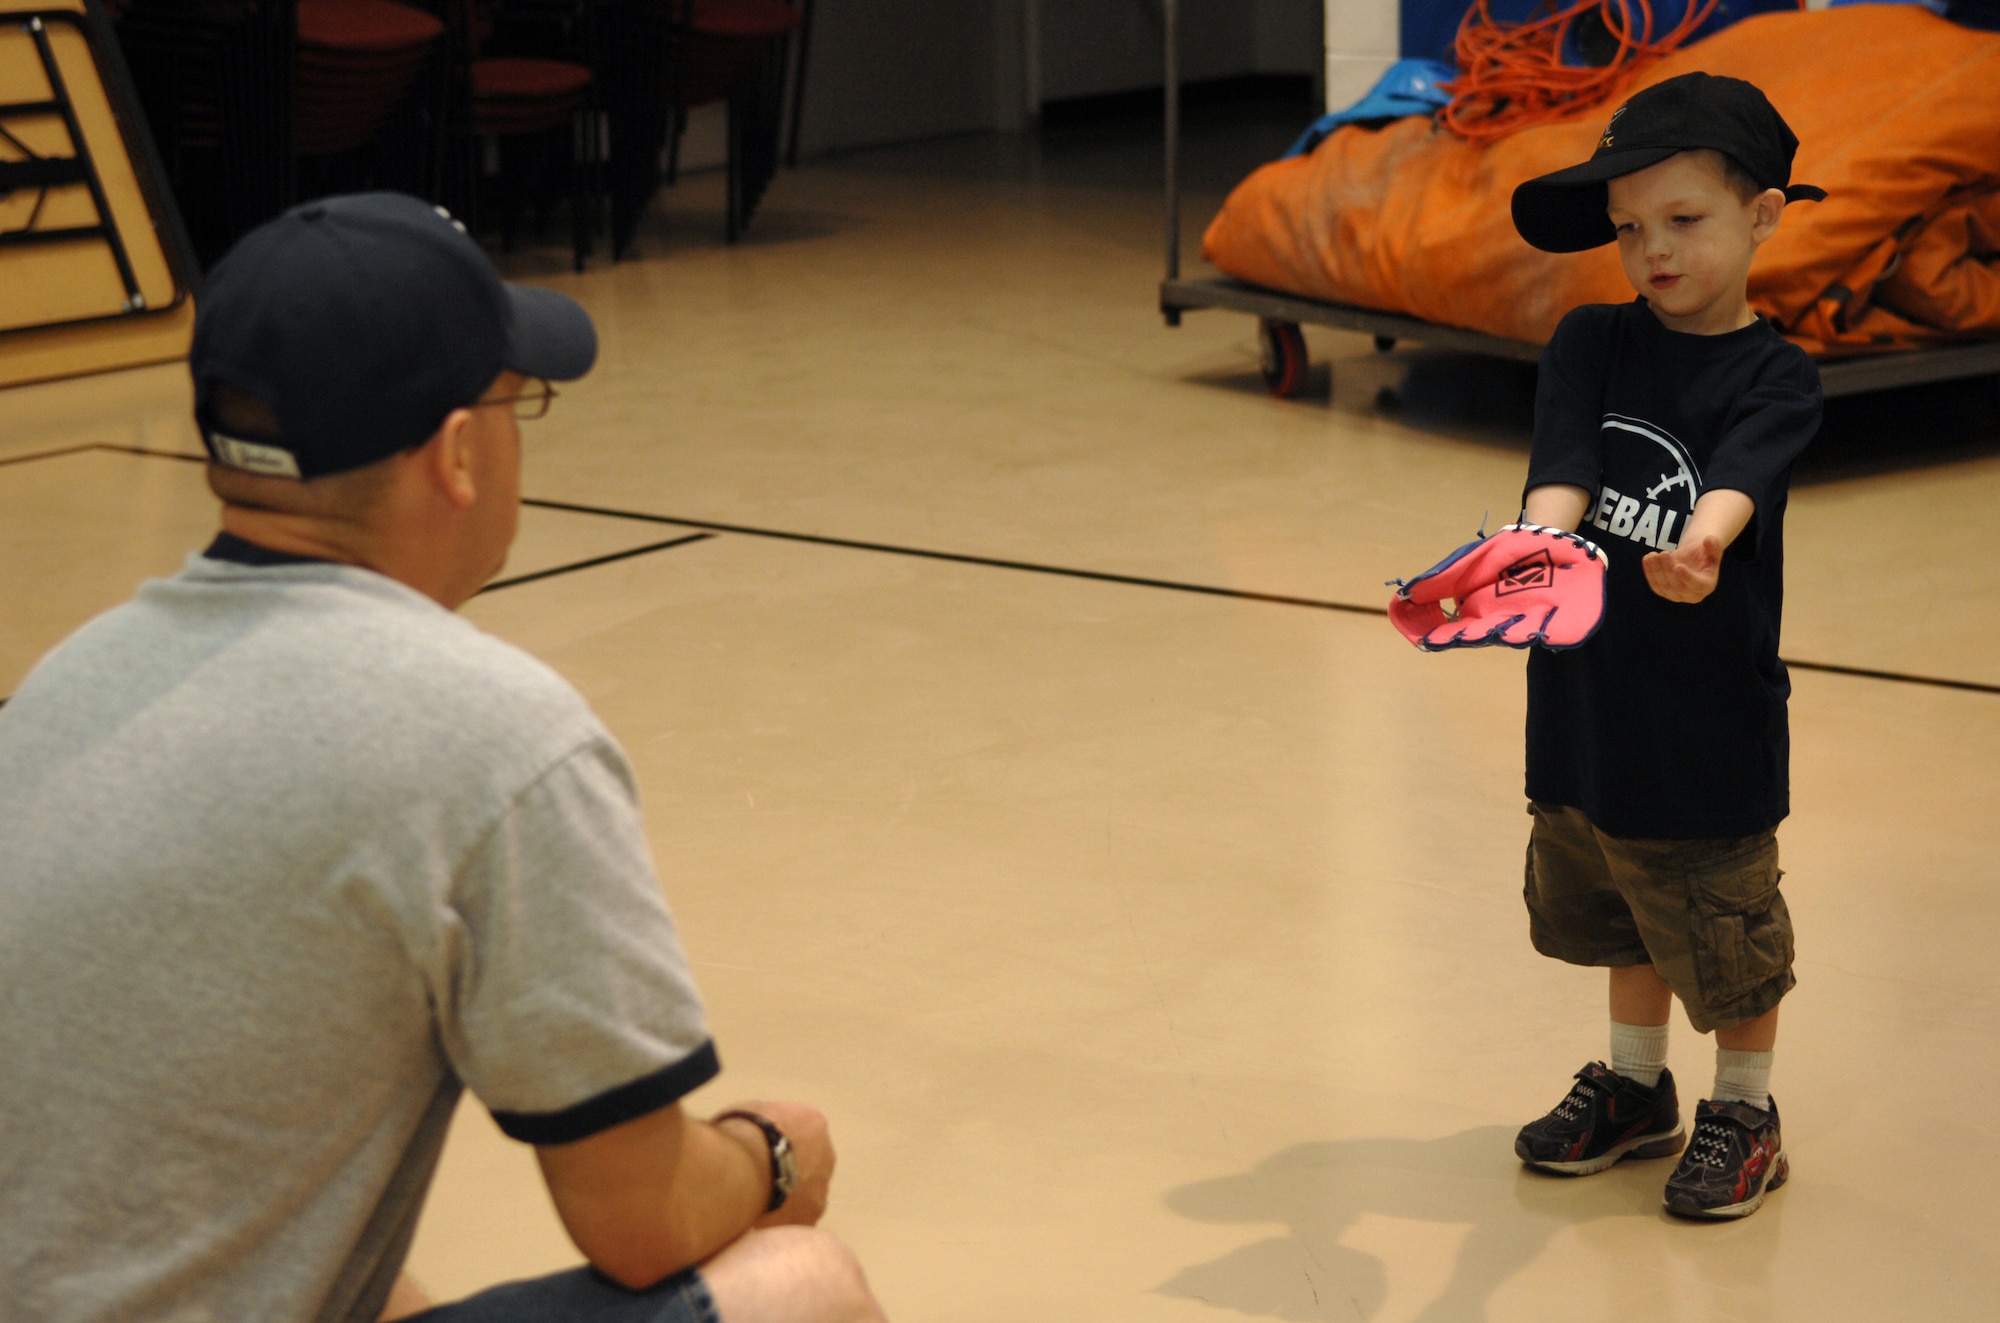 HOLLOMAN AIR FORCE BASE, N.M. -- Tech. Sgt. John Talbot, 49th Maintenance Squadron, throws a ball for his son, Steven, 4, to catch at the Youth and Teen Center at Holloman Air Force Base, N.M., May 8. They are participating in the Start Smart baseball program, which teaches children ages 3 to 5 the fundamentals of baseball before they join an official baseball team. The classes last one hour and are held twice a week for three weeks. All children are accompanied by their parents, who work with them at different stations such as throwing, catching and hitting the ball. (U.S. Air Force photo/Airman Sondra M. Wieseler)